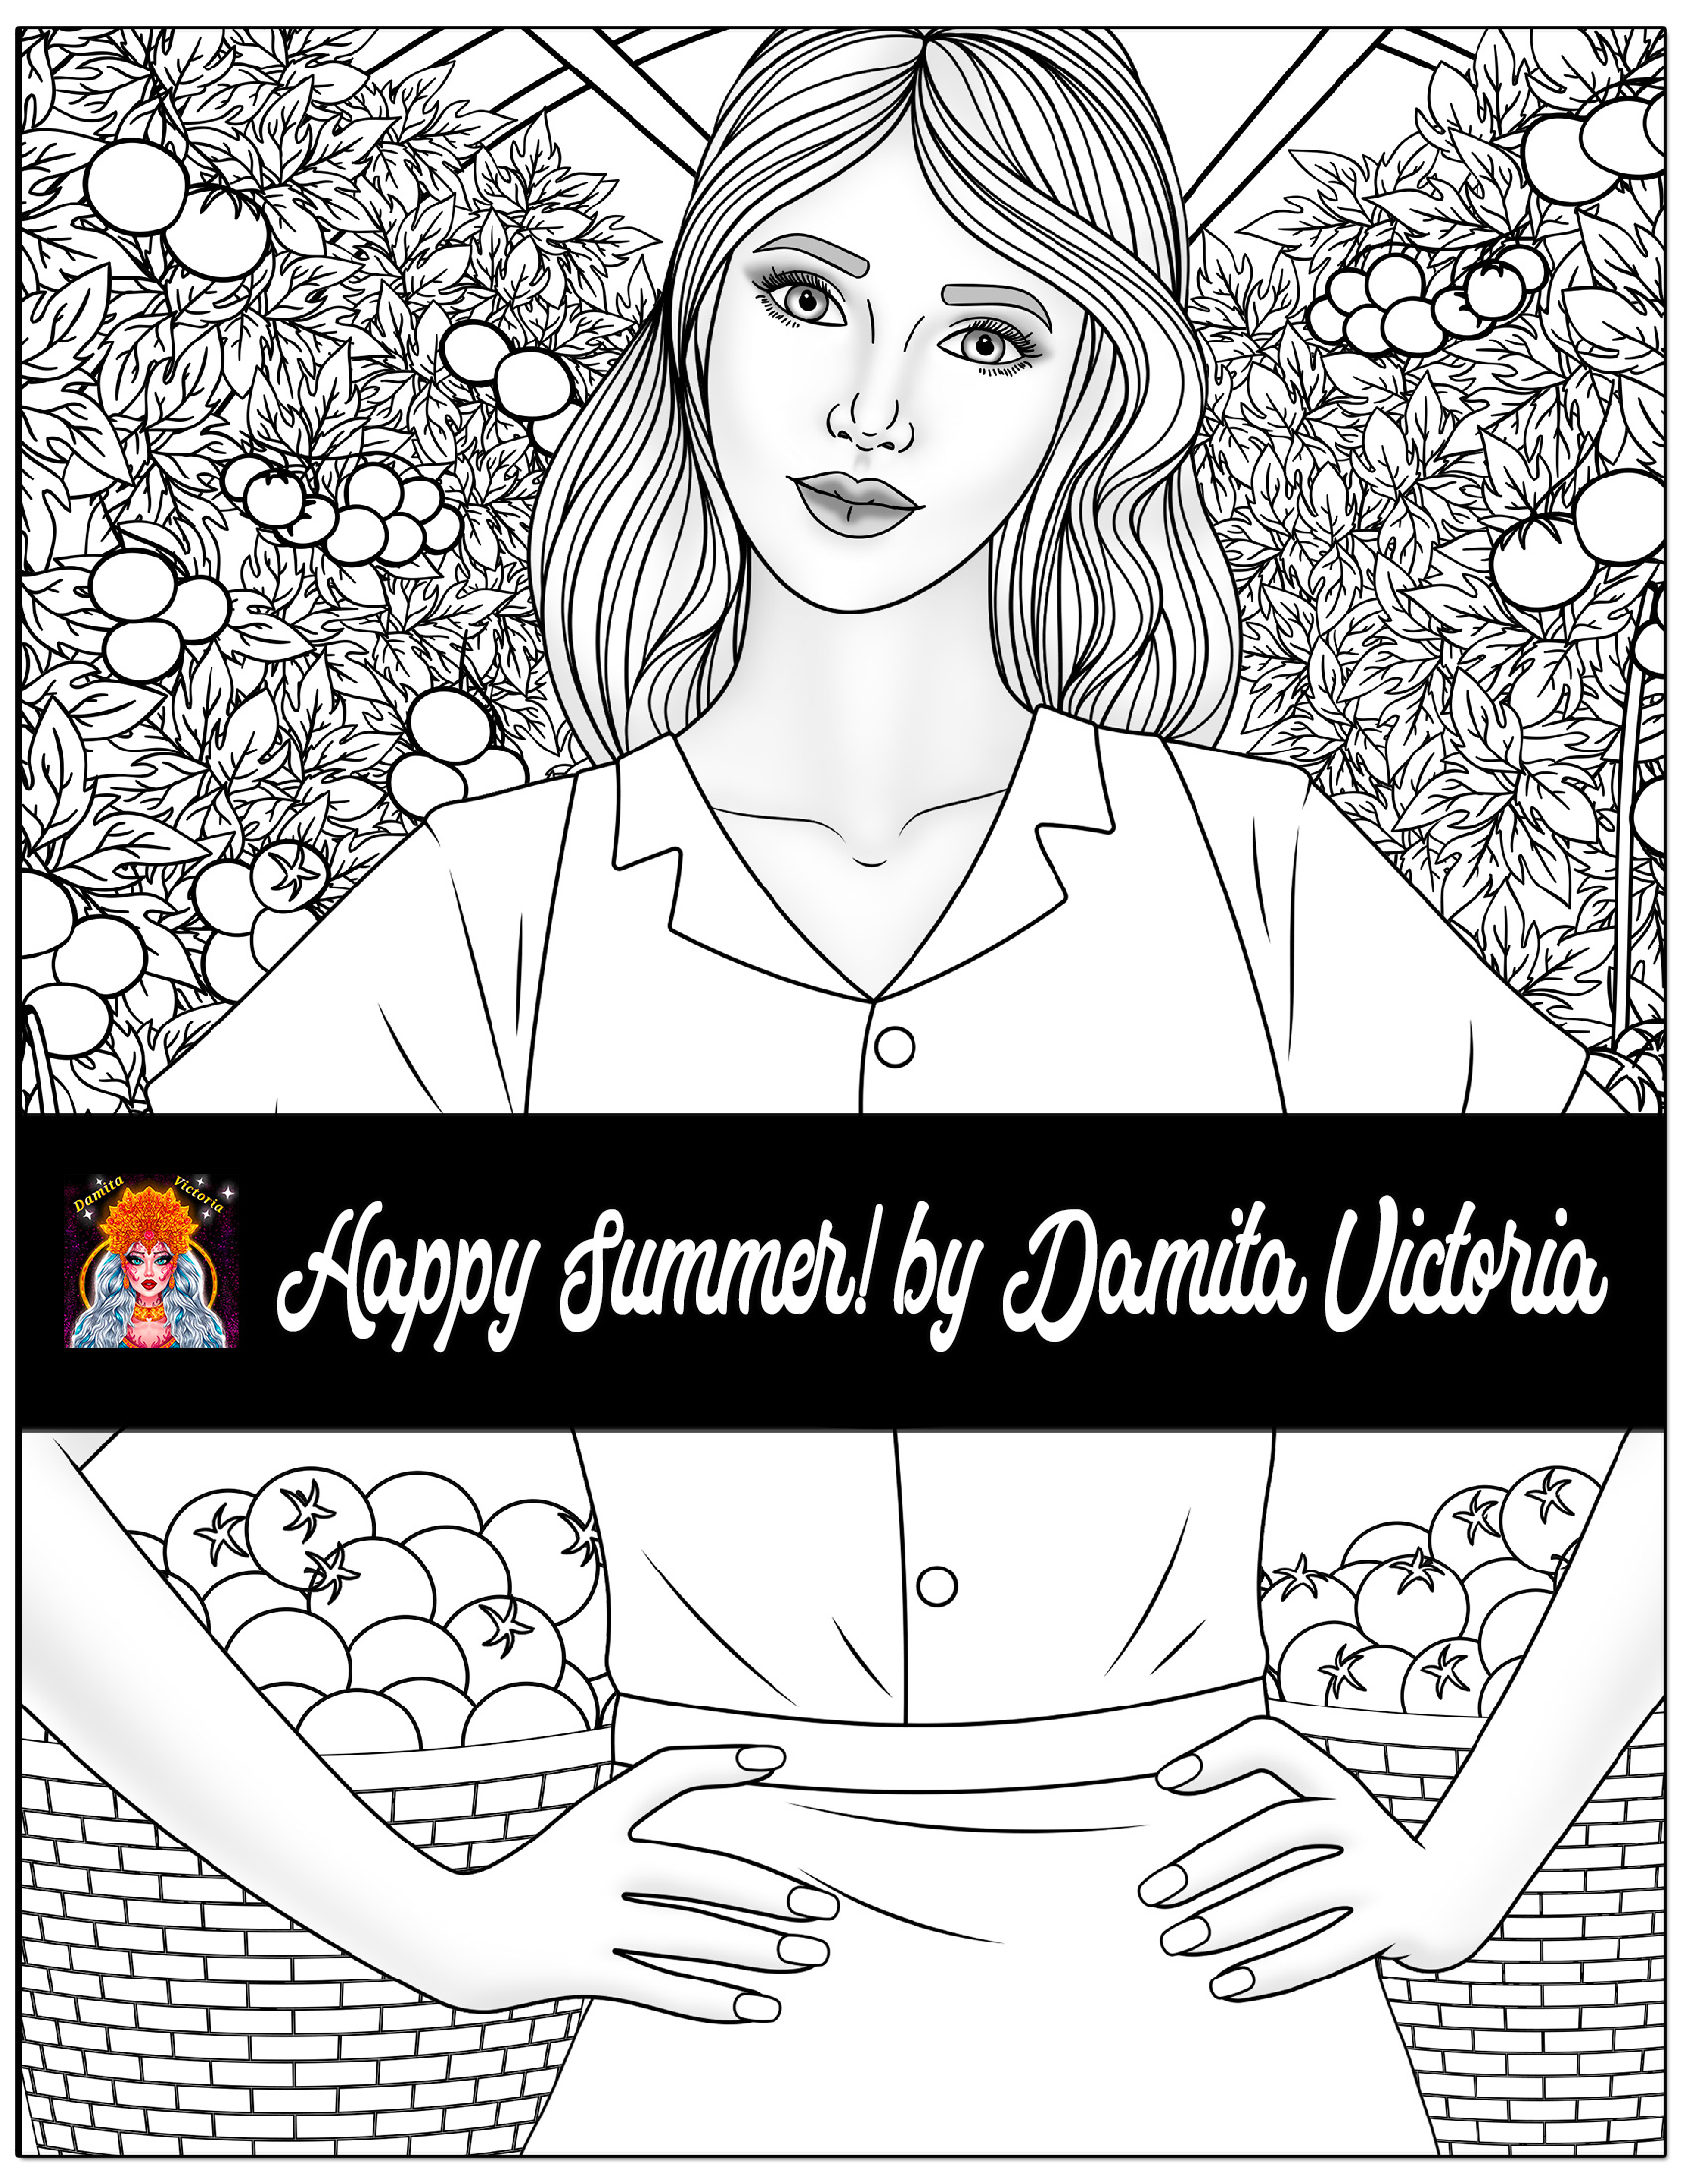 Adult Coloring Book, Fantastic Beauties Book 2: Women Coloring Book for  Adults Featuring a Wonderful Coloring Pages for Adults Relaxation by Damita  Victoria